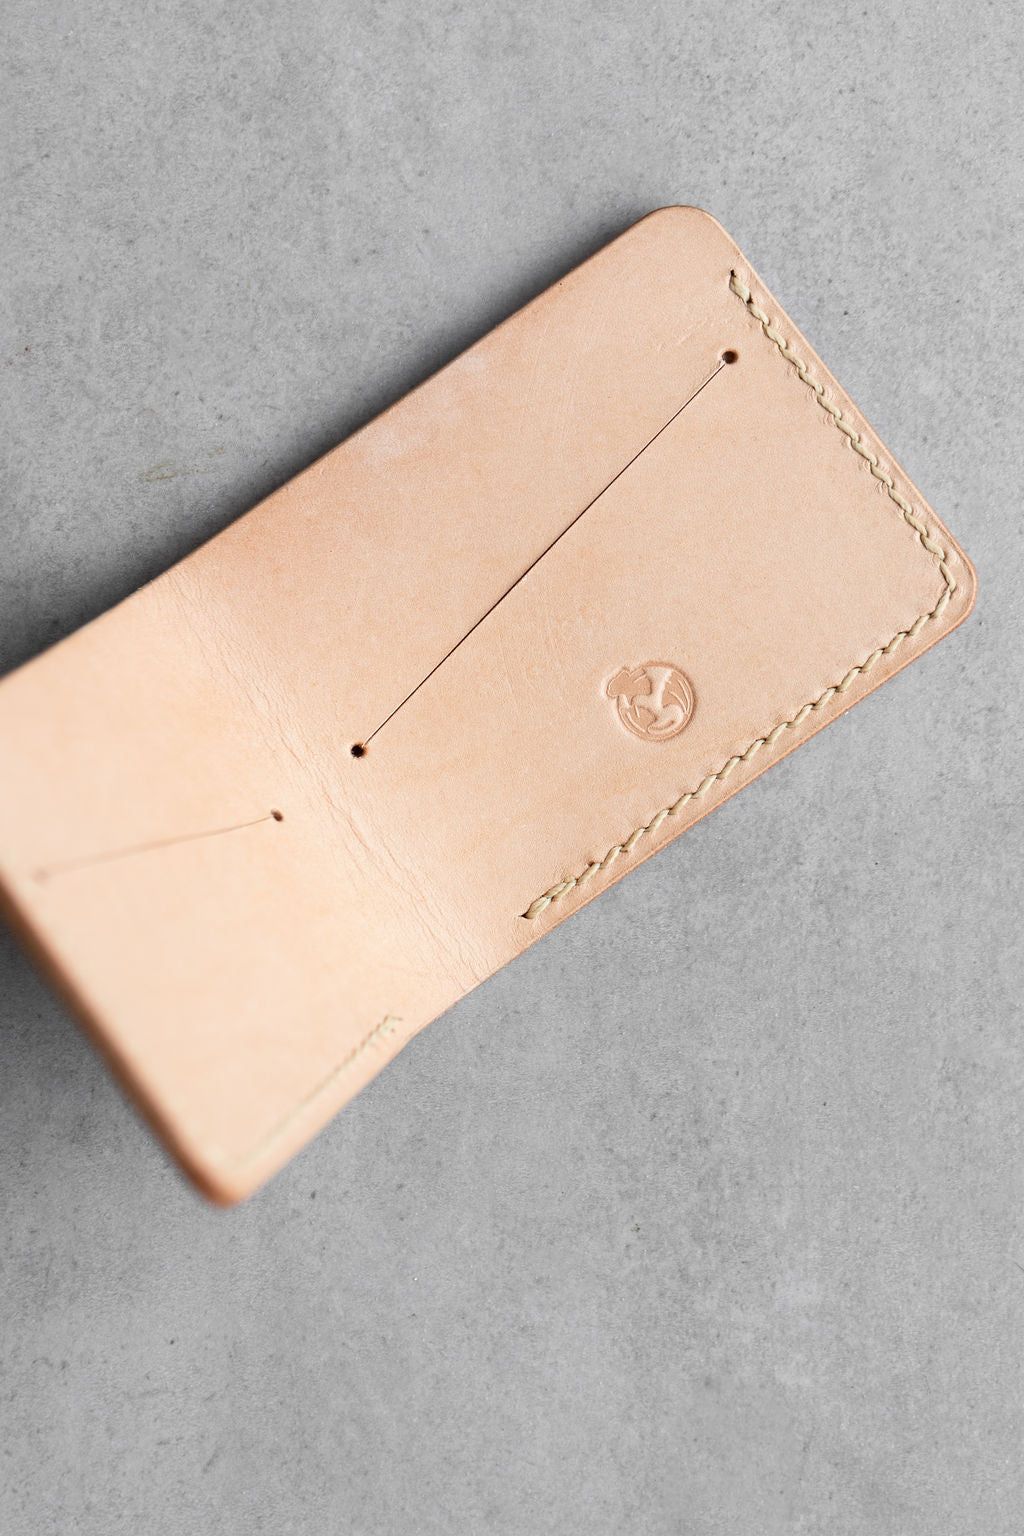 Stay Organized with Crafted Wallets: Functional and Stylish Storage Solutions